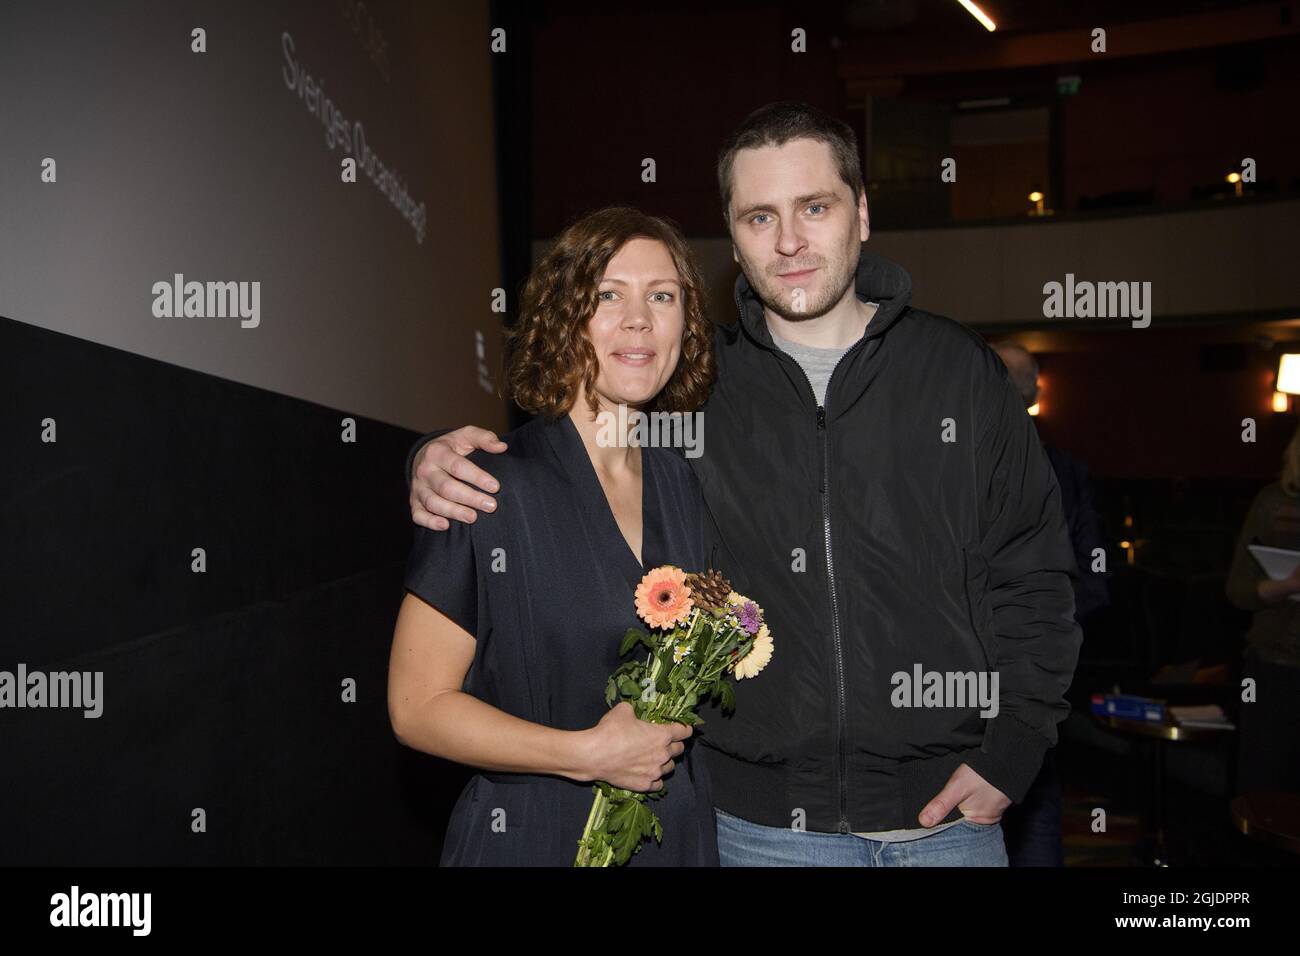 Director Amanda Kernell and actor Sverrir Gudnason in Stockholm, Sweden, November 03, 2020, after the announcement that their film 'Charter' has been chosen as the Swedish submission for the Academy Award for Best International Feature Film Photo: Jessica Gow / TT code 10070  Stock Photo